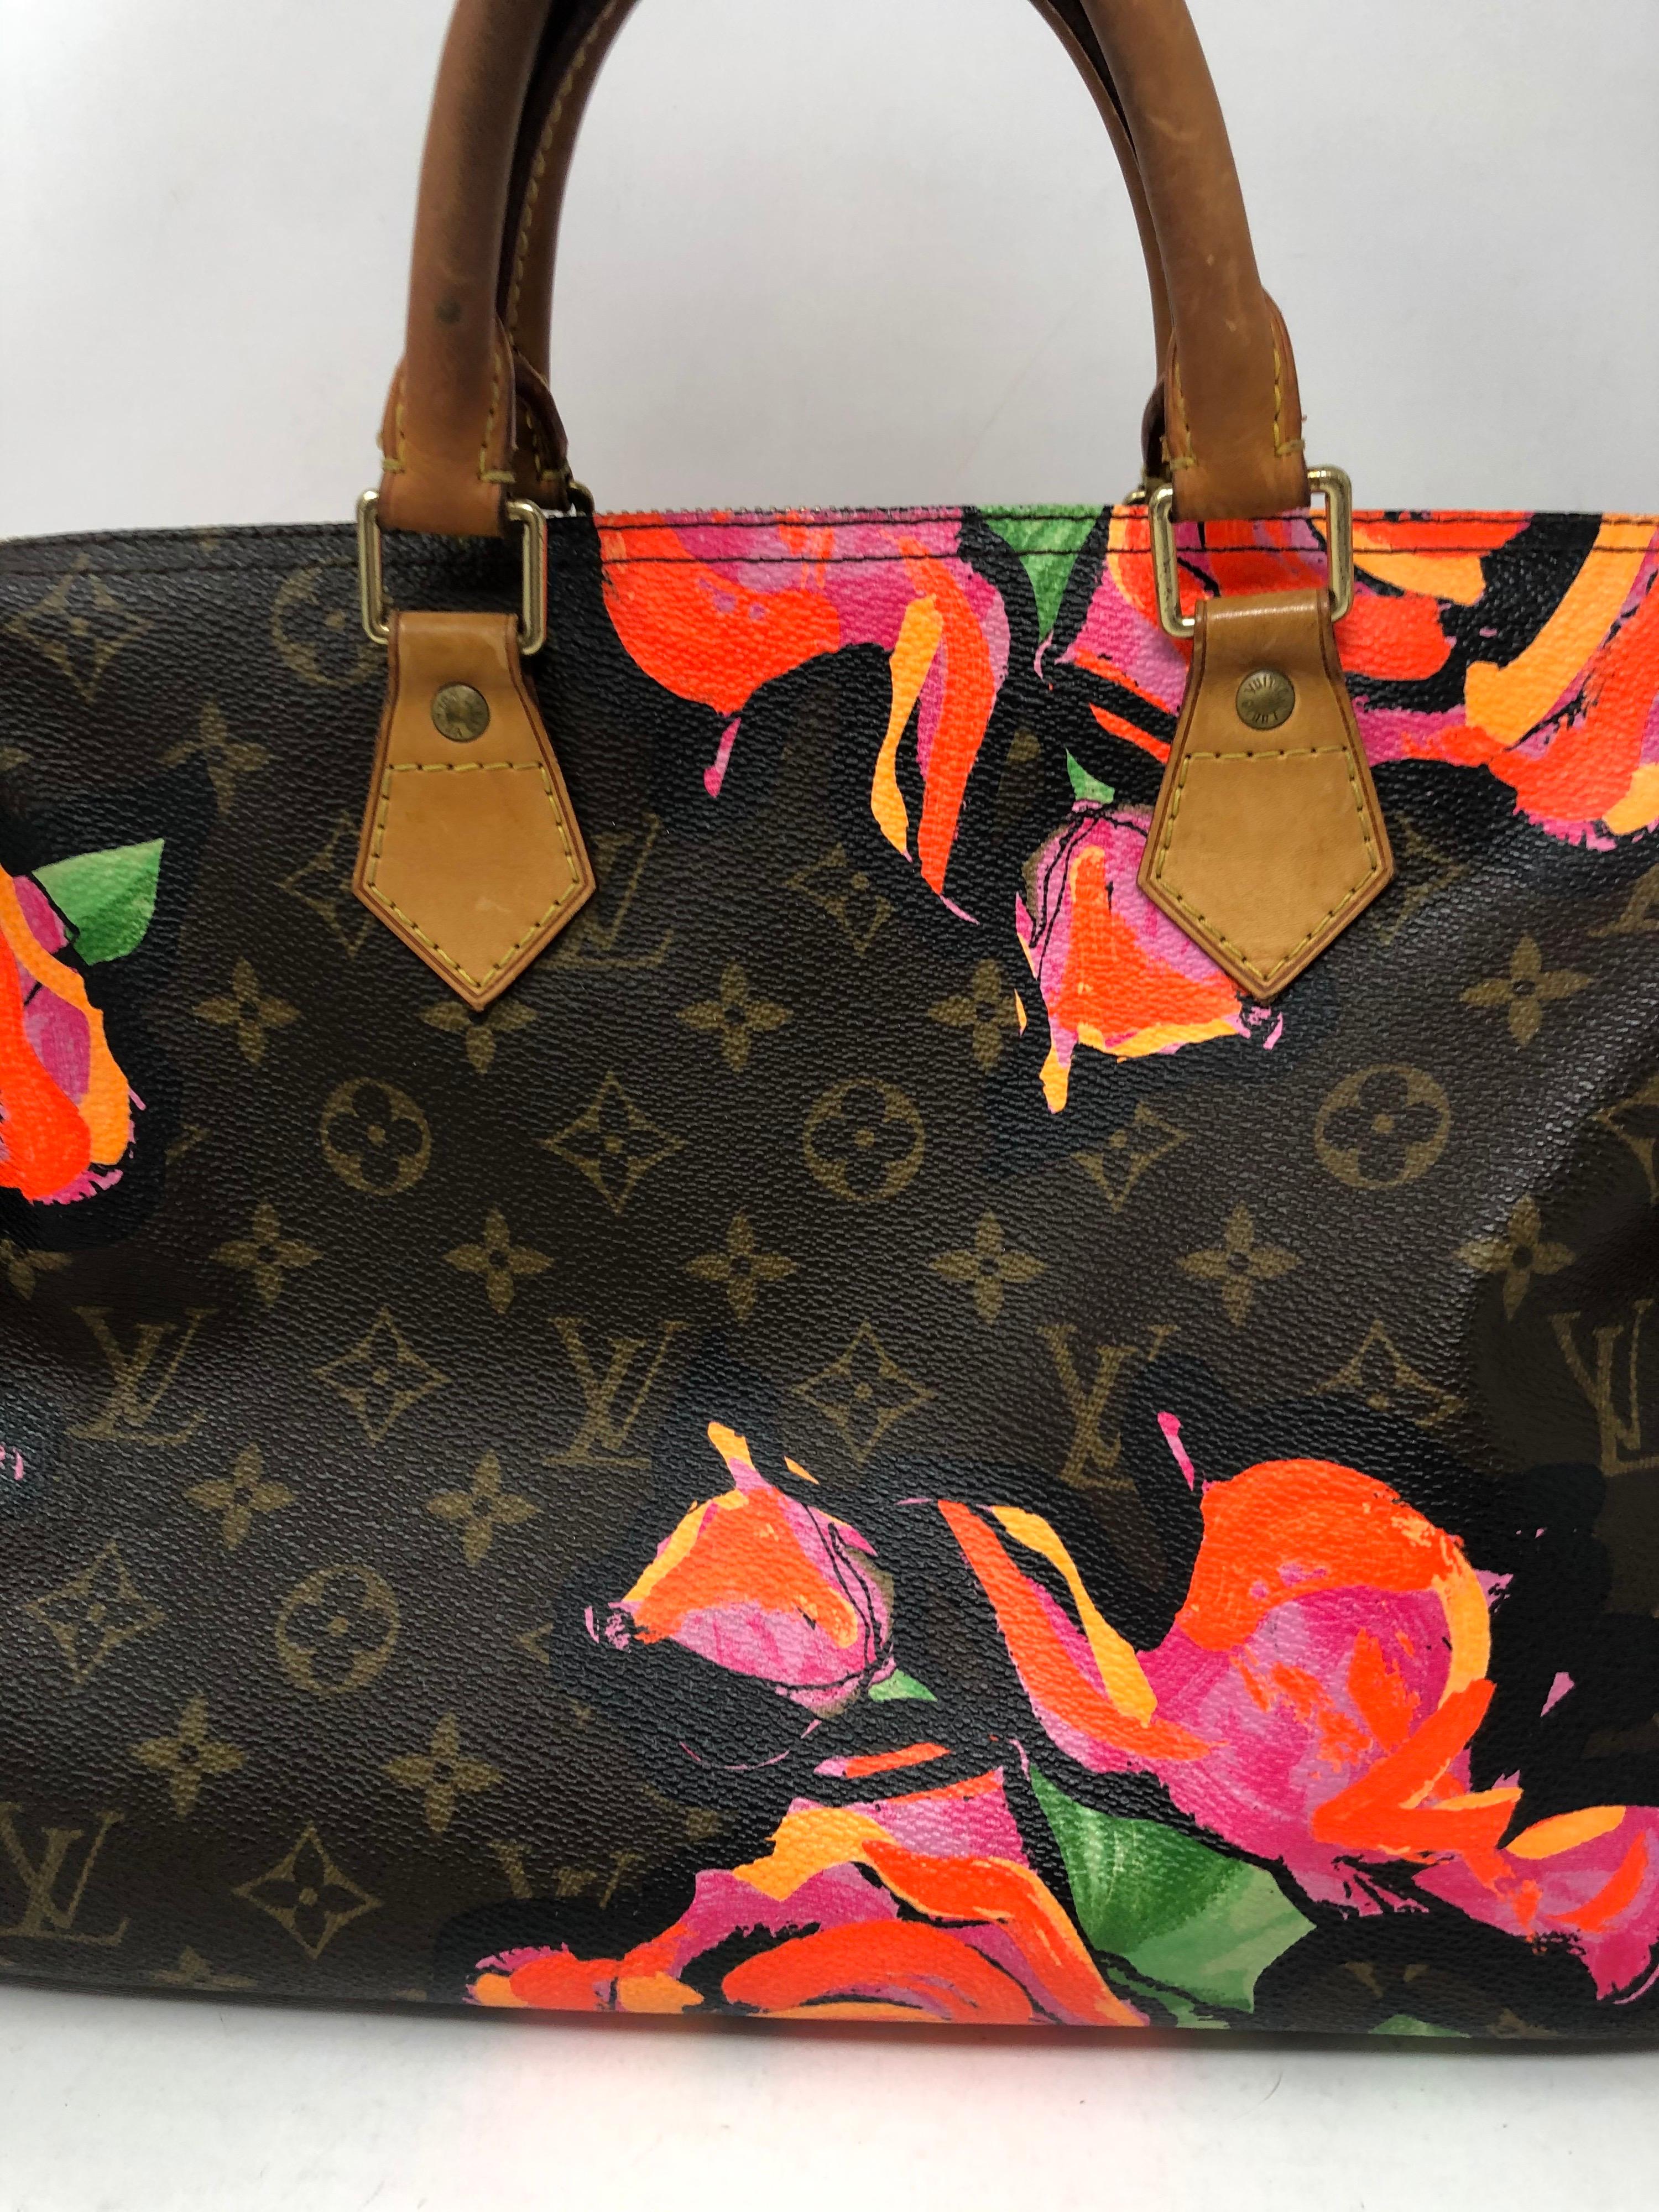 Louis Vuitton Roses Speedy by Stephen Sprouse. Iconic designer for LV. Rare and limited. Roses painted series in the speedy 30 size. Has some wear from age. Handles and leather has a nice patina. Lots of life left. Collector's piece for LV lovers.